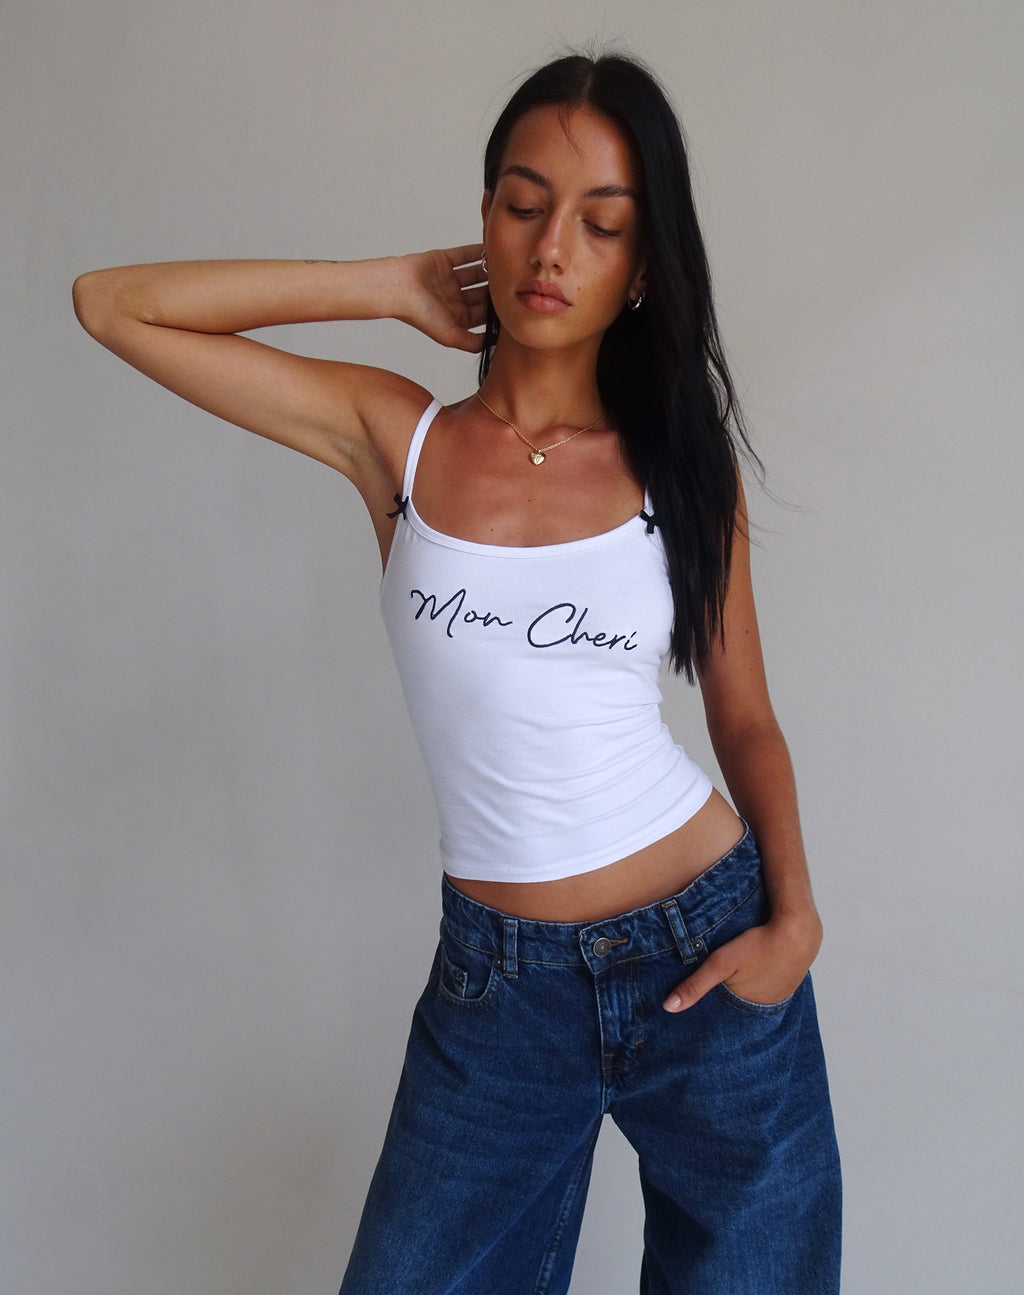 Isa Vest Top in White with Mon Cheri Embroidery